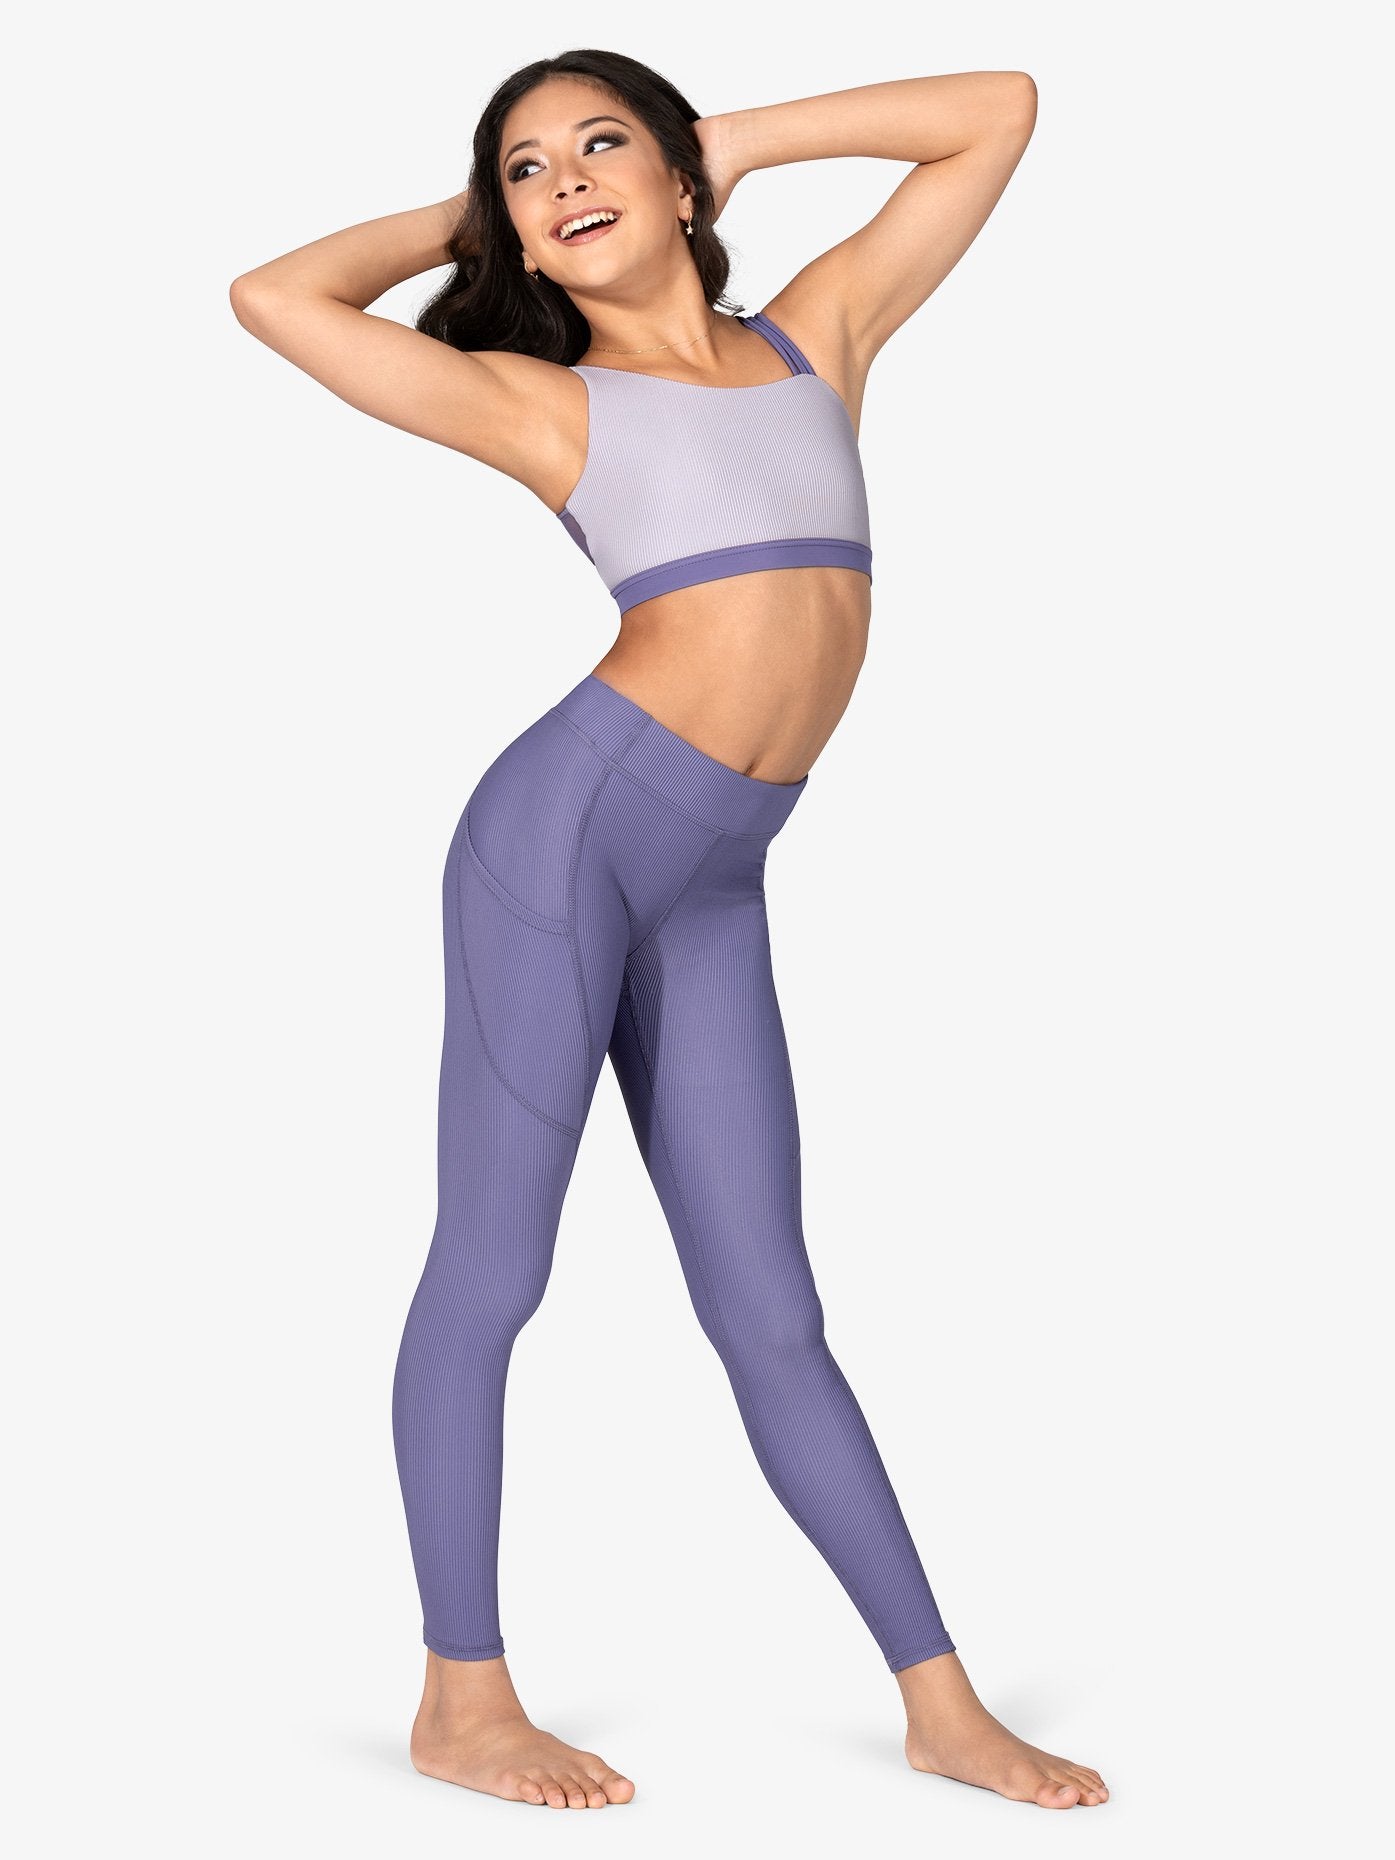 High waisted ribbed purple leggings with side pockets